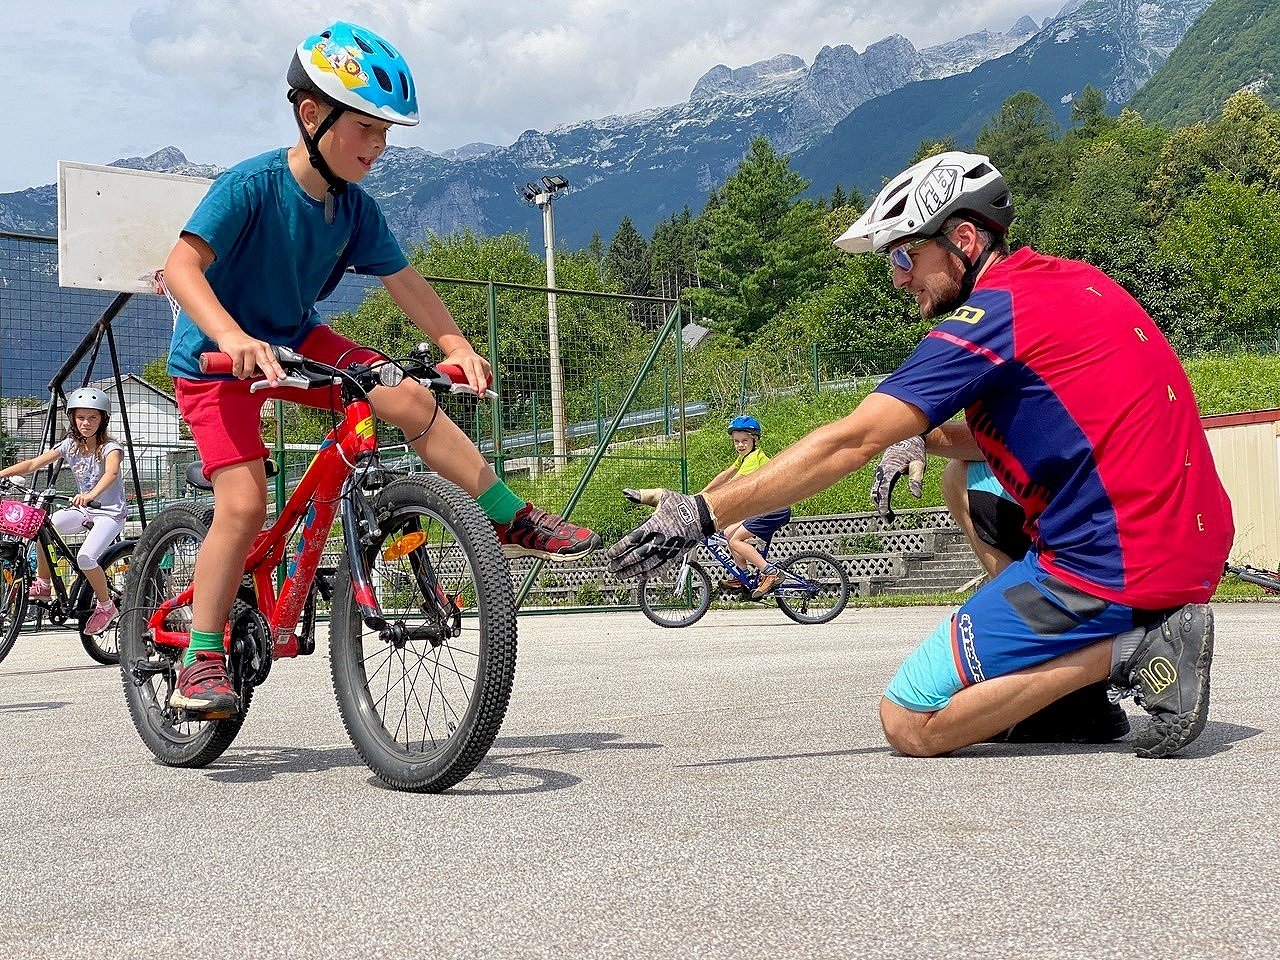 Cycling workshop for children